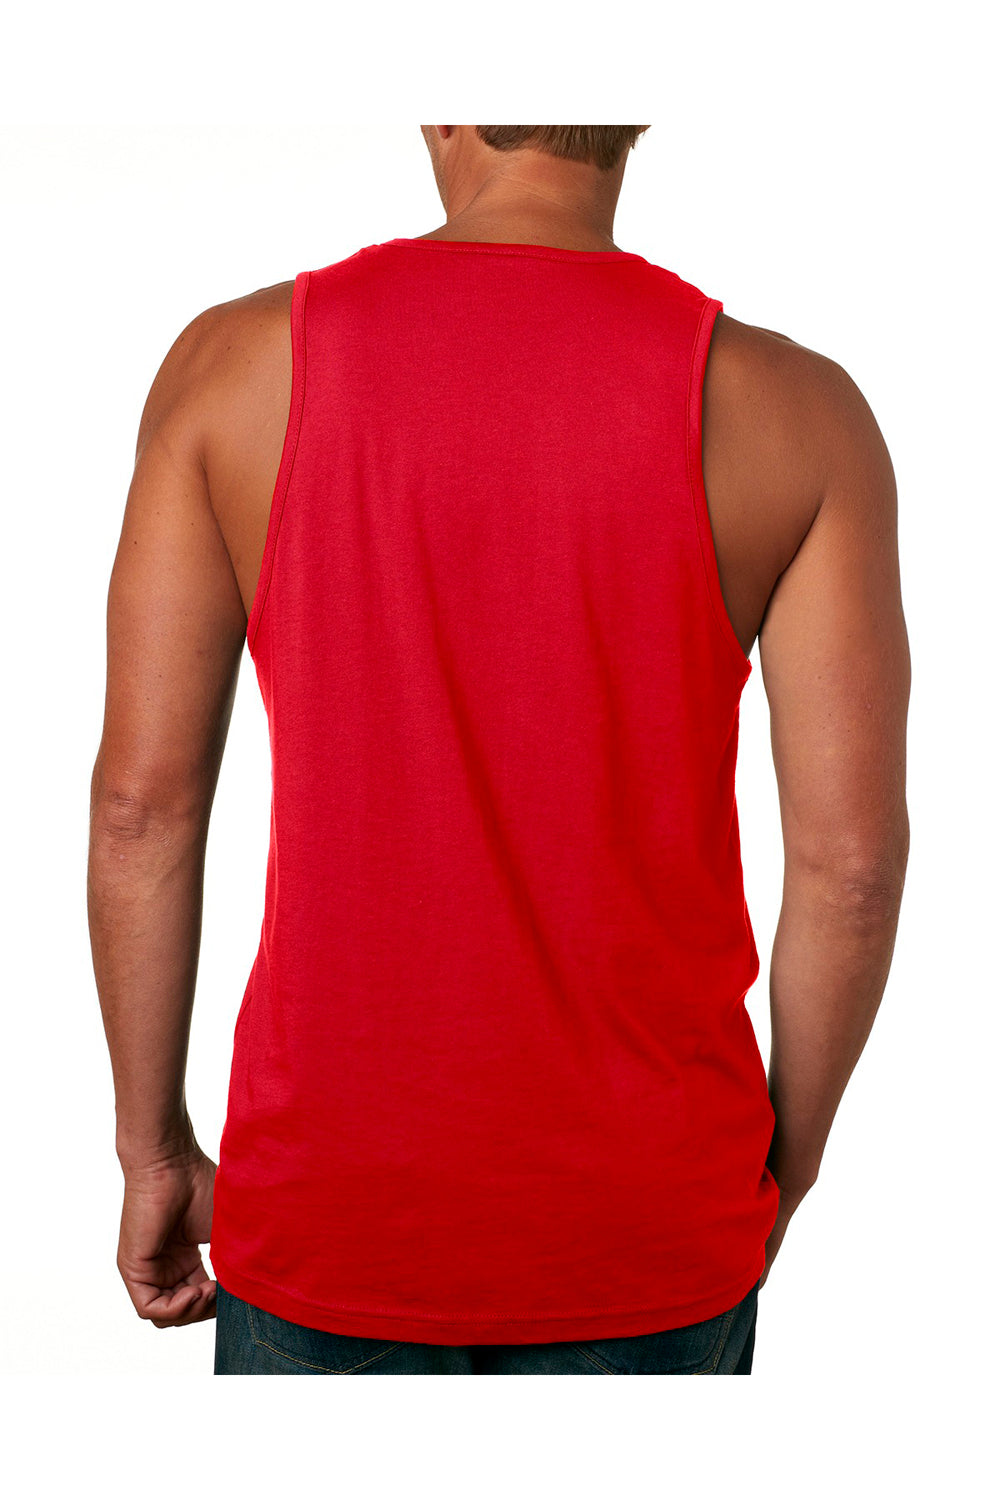 Next Level 3633 Mens Tank Top Red Back